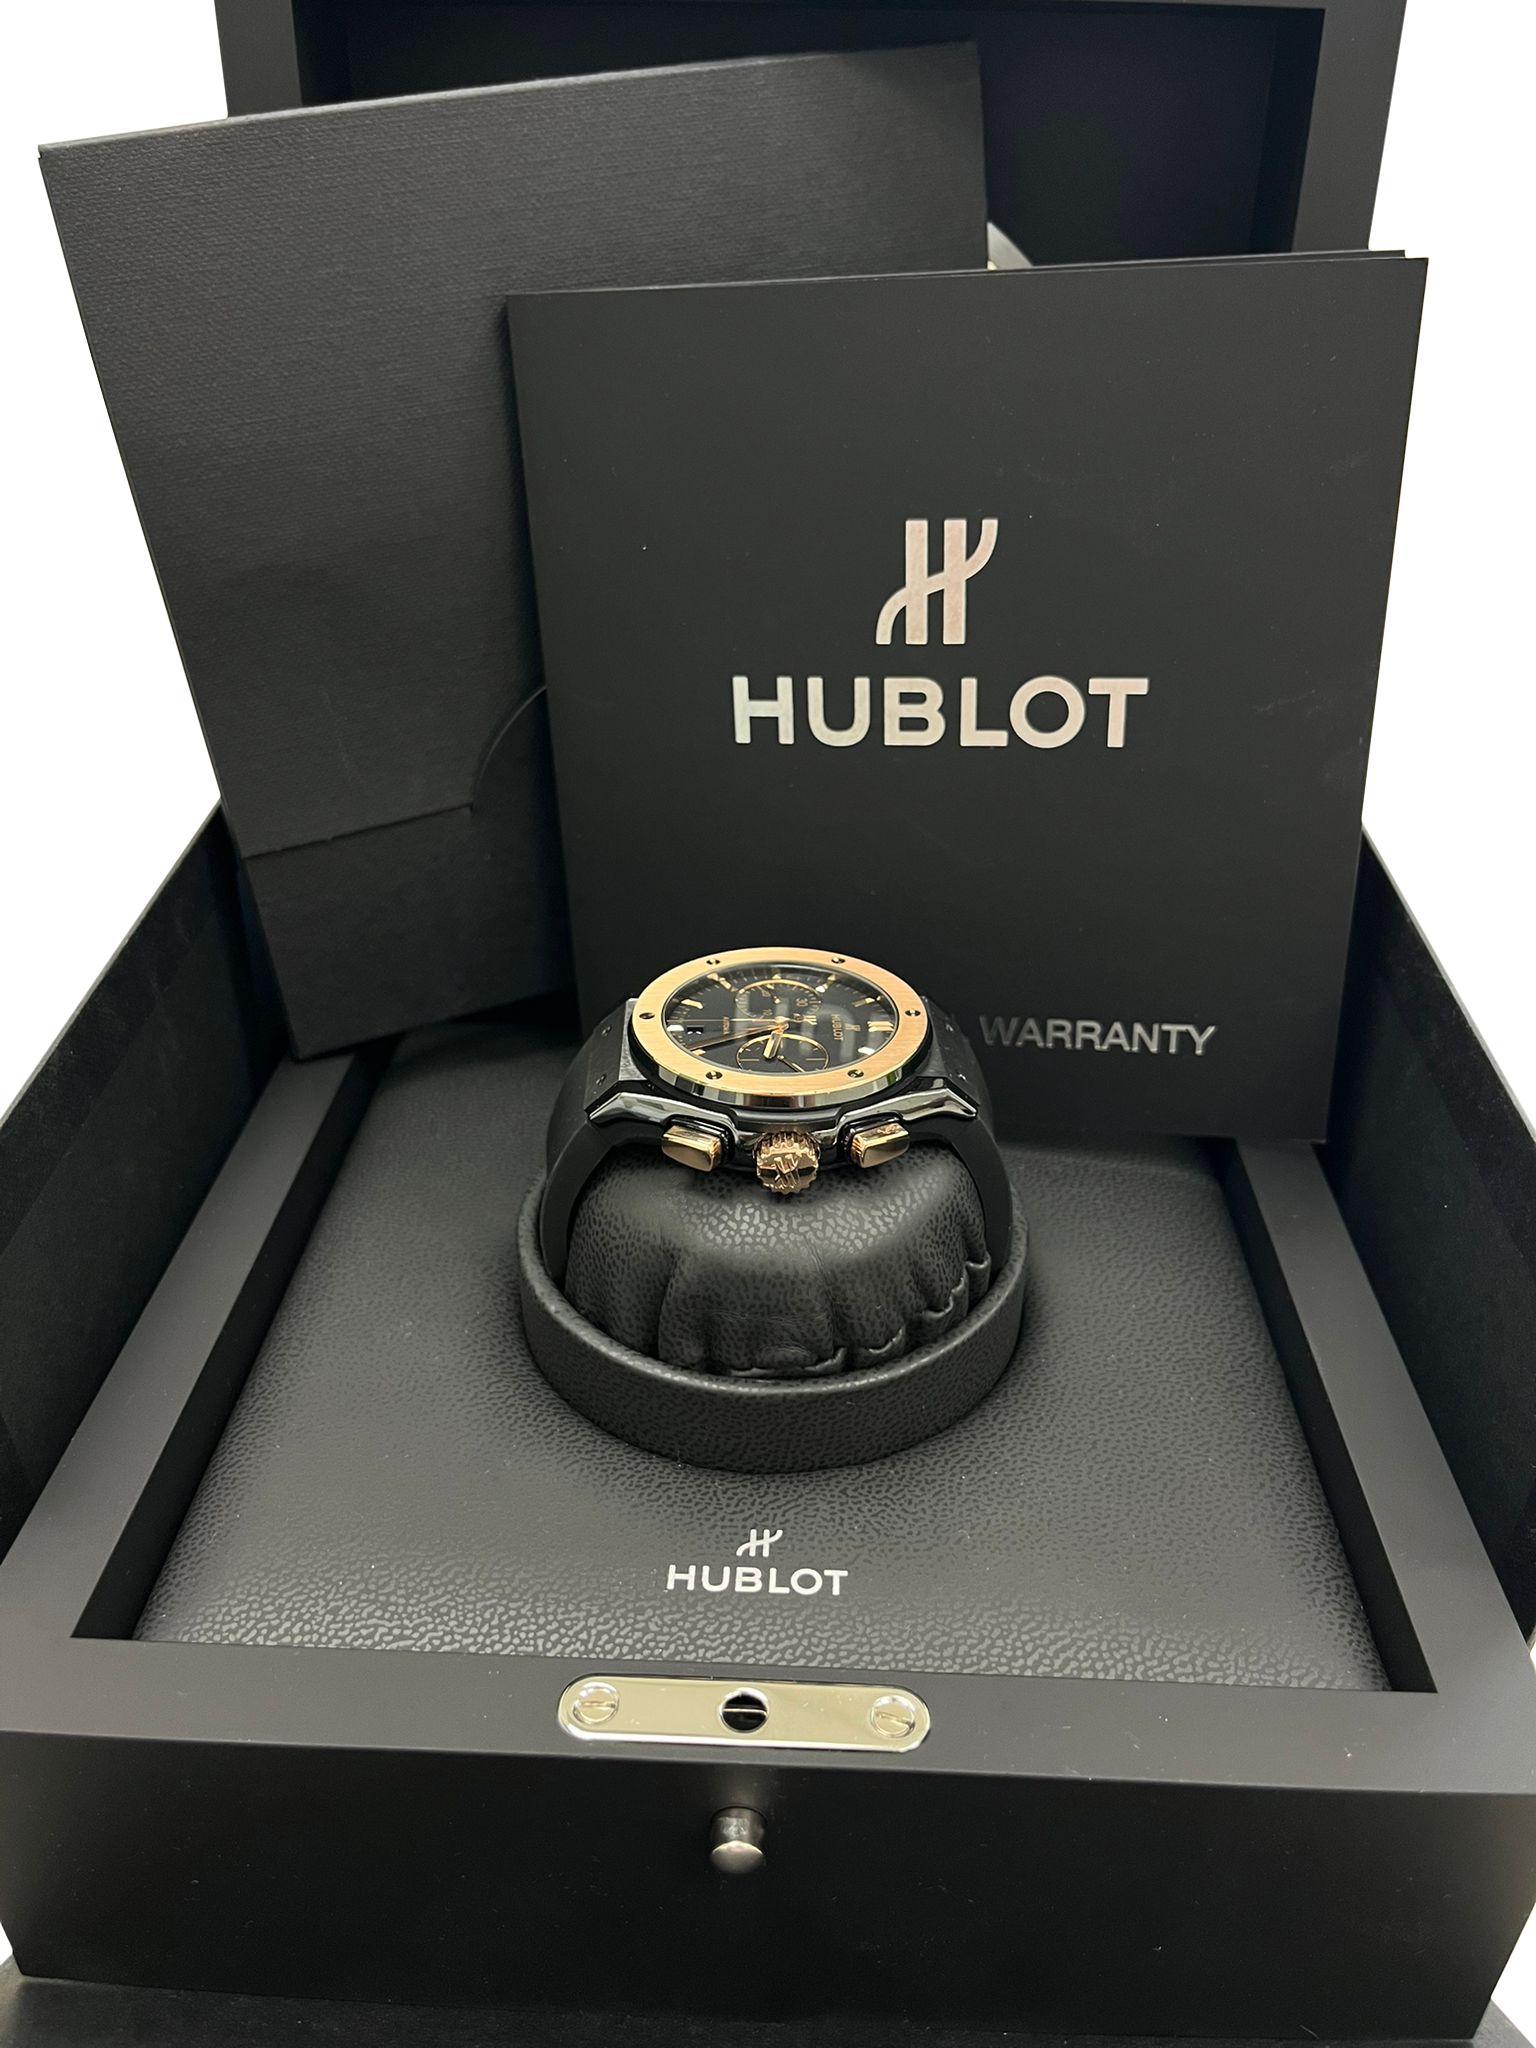 Hublot Classic Fusion Chronograph Ceramic King Gold 45mm Watch 521.CO.1181.RX For Sale 10